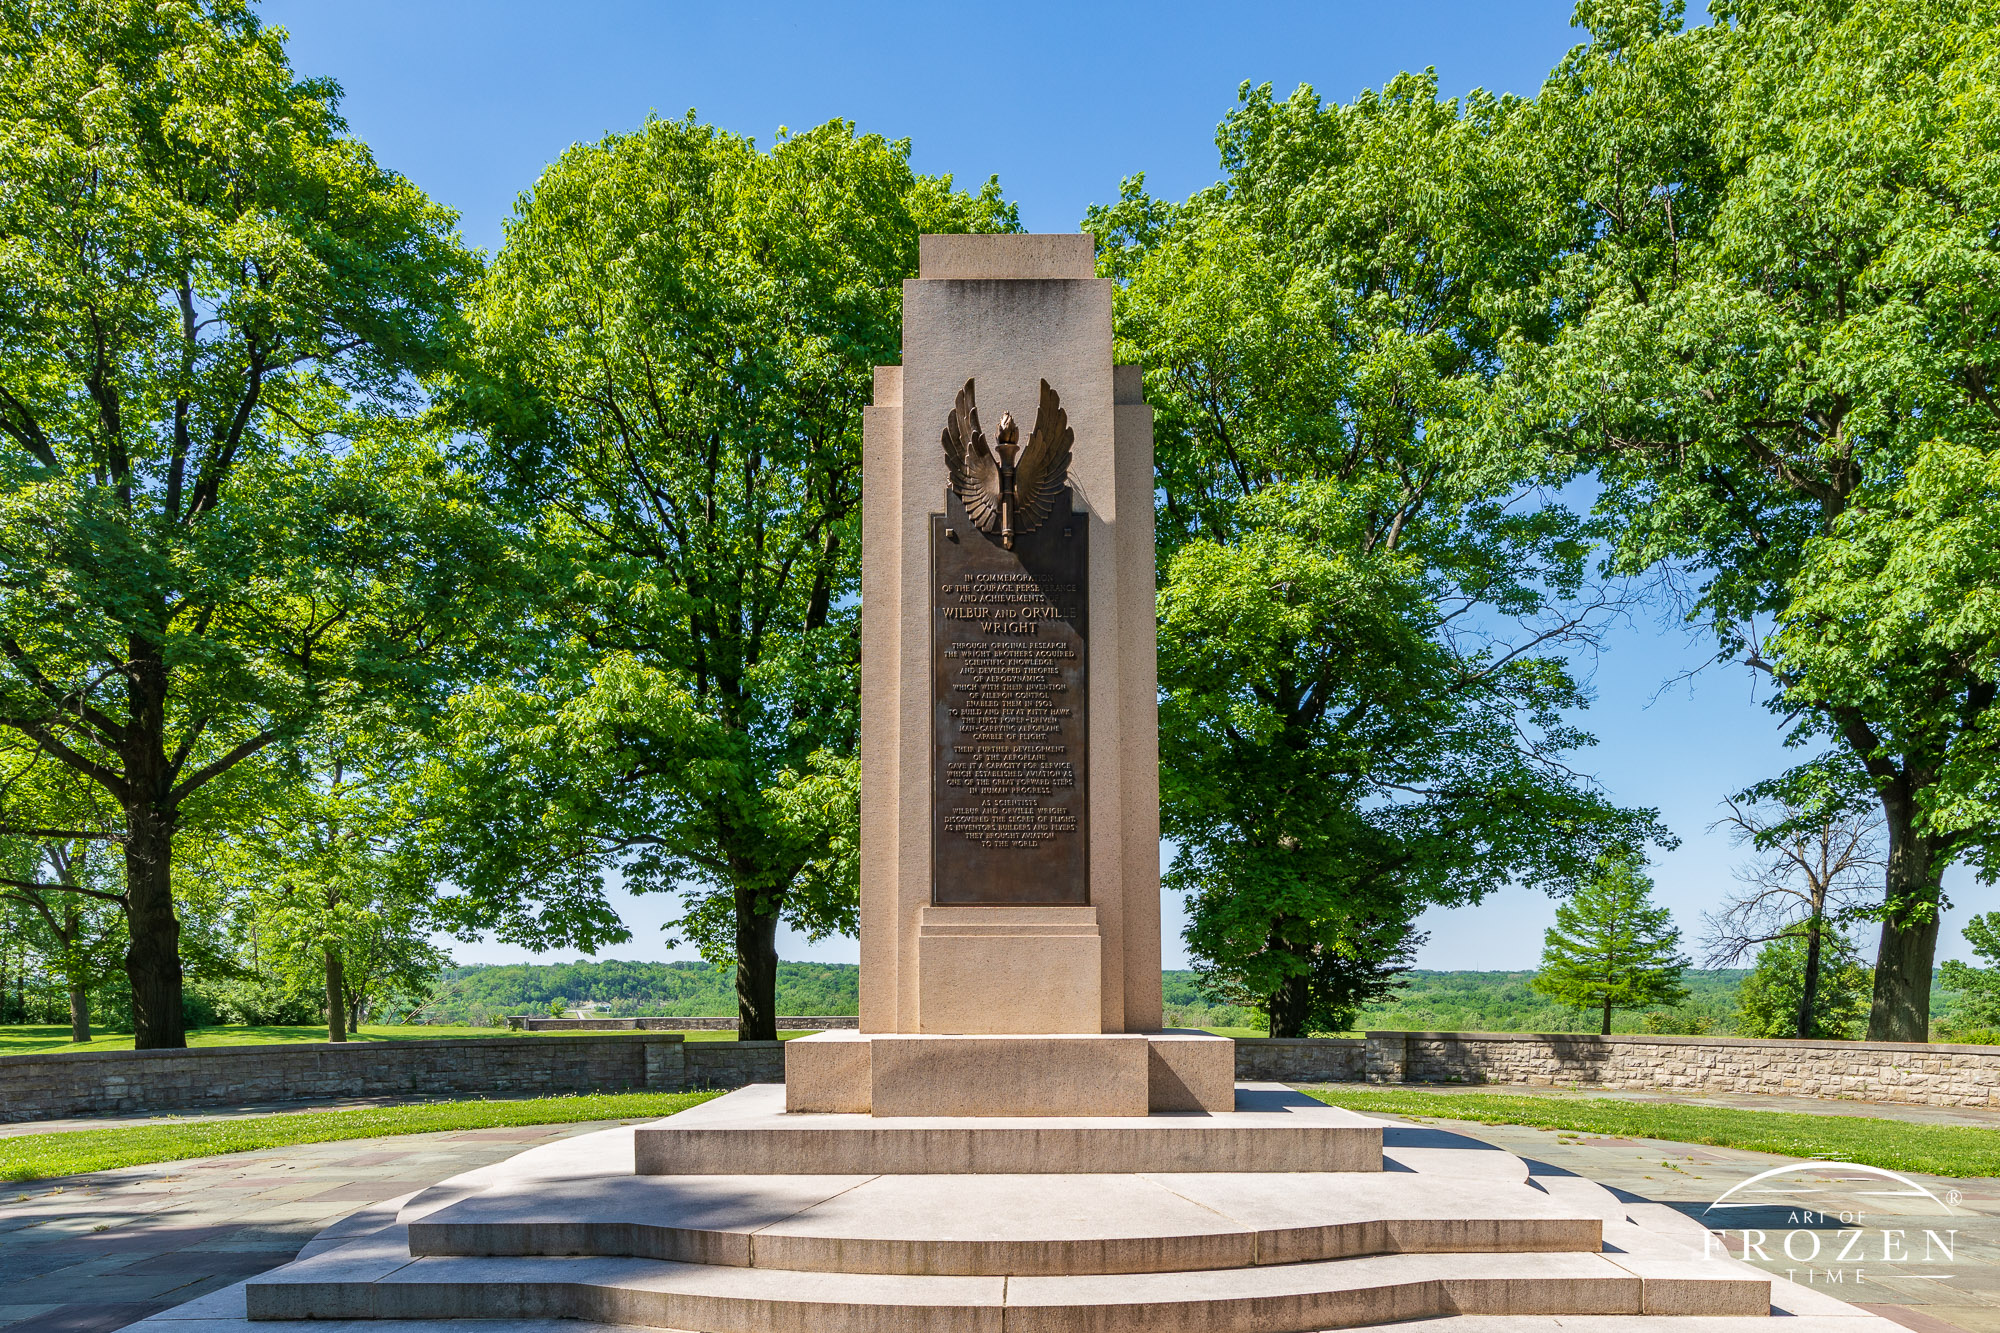 A memorial to Wilbur and Orville Wrigtht celebrating their invention of controlled flight which stands on a hill overlooking Huffman Prairie and Wright-Patterson AFB